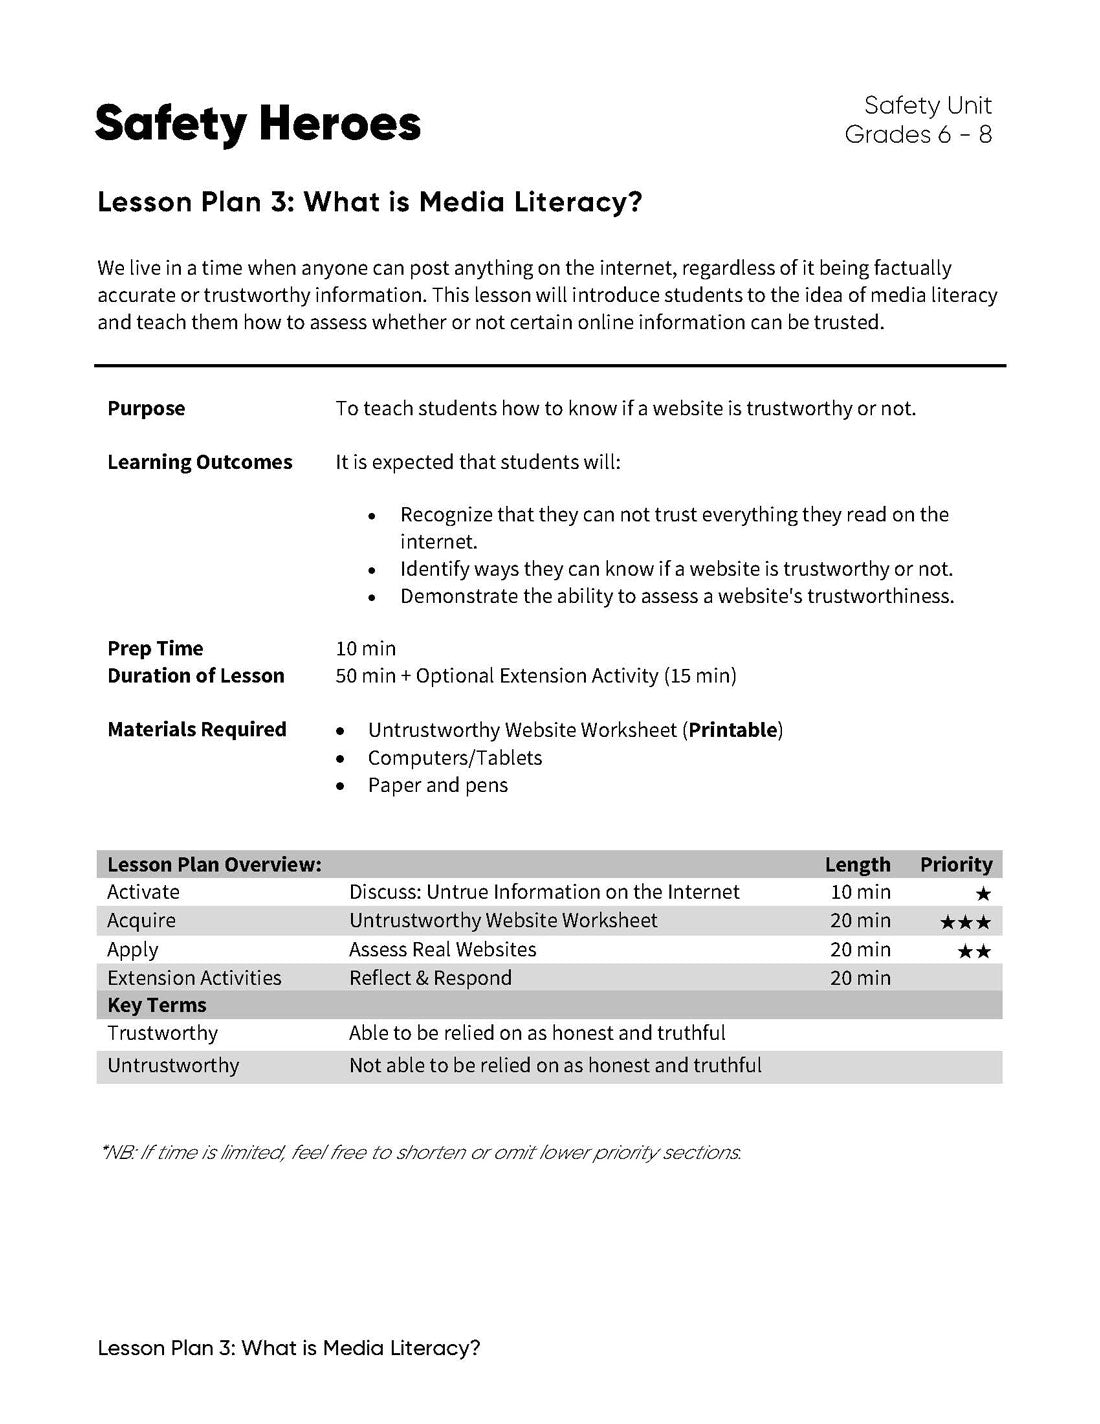 Lesson Plan 3: What is Media Literacy